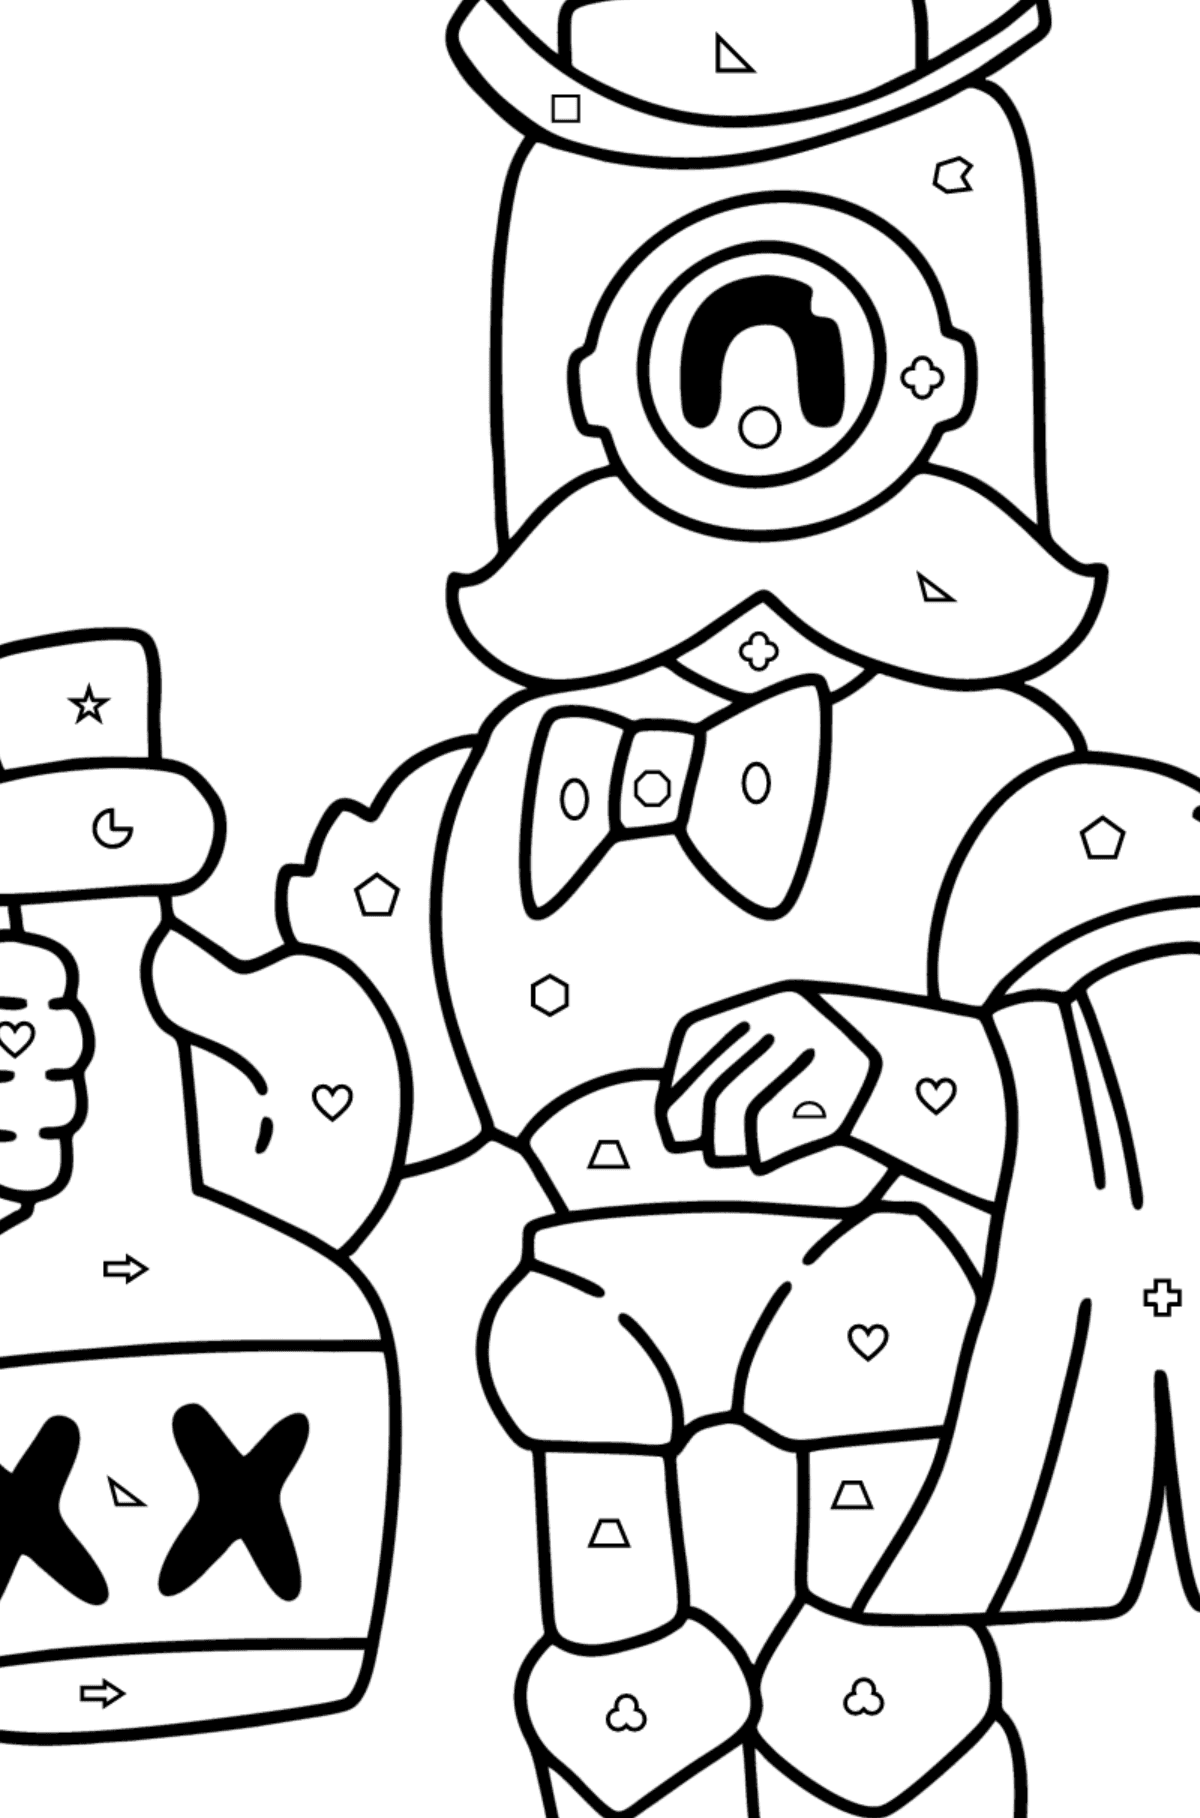 Brawl Stars Barley colouring page - Coloring by Geometric Shapes for Kids